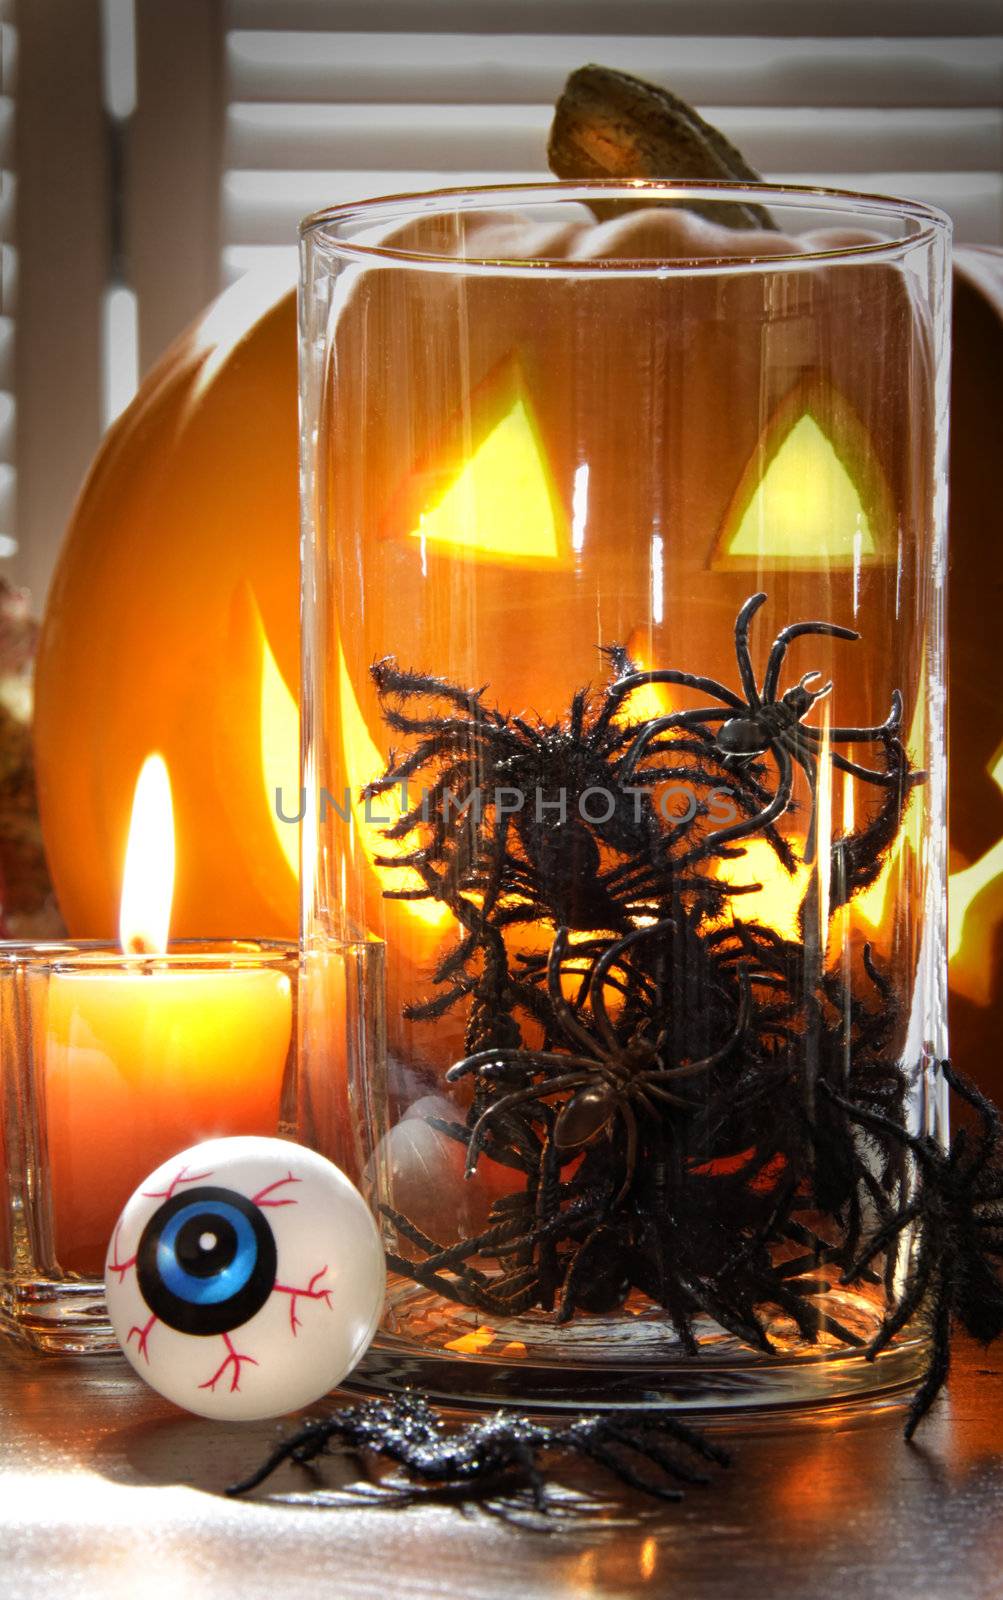 Spiders in glass container for Halloween by Sandralise